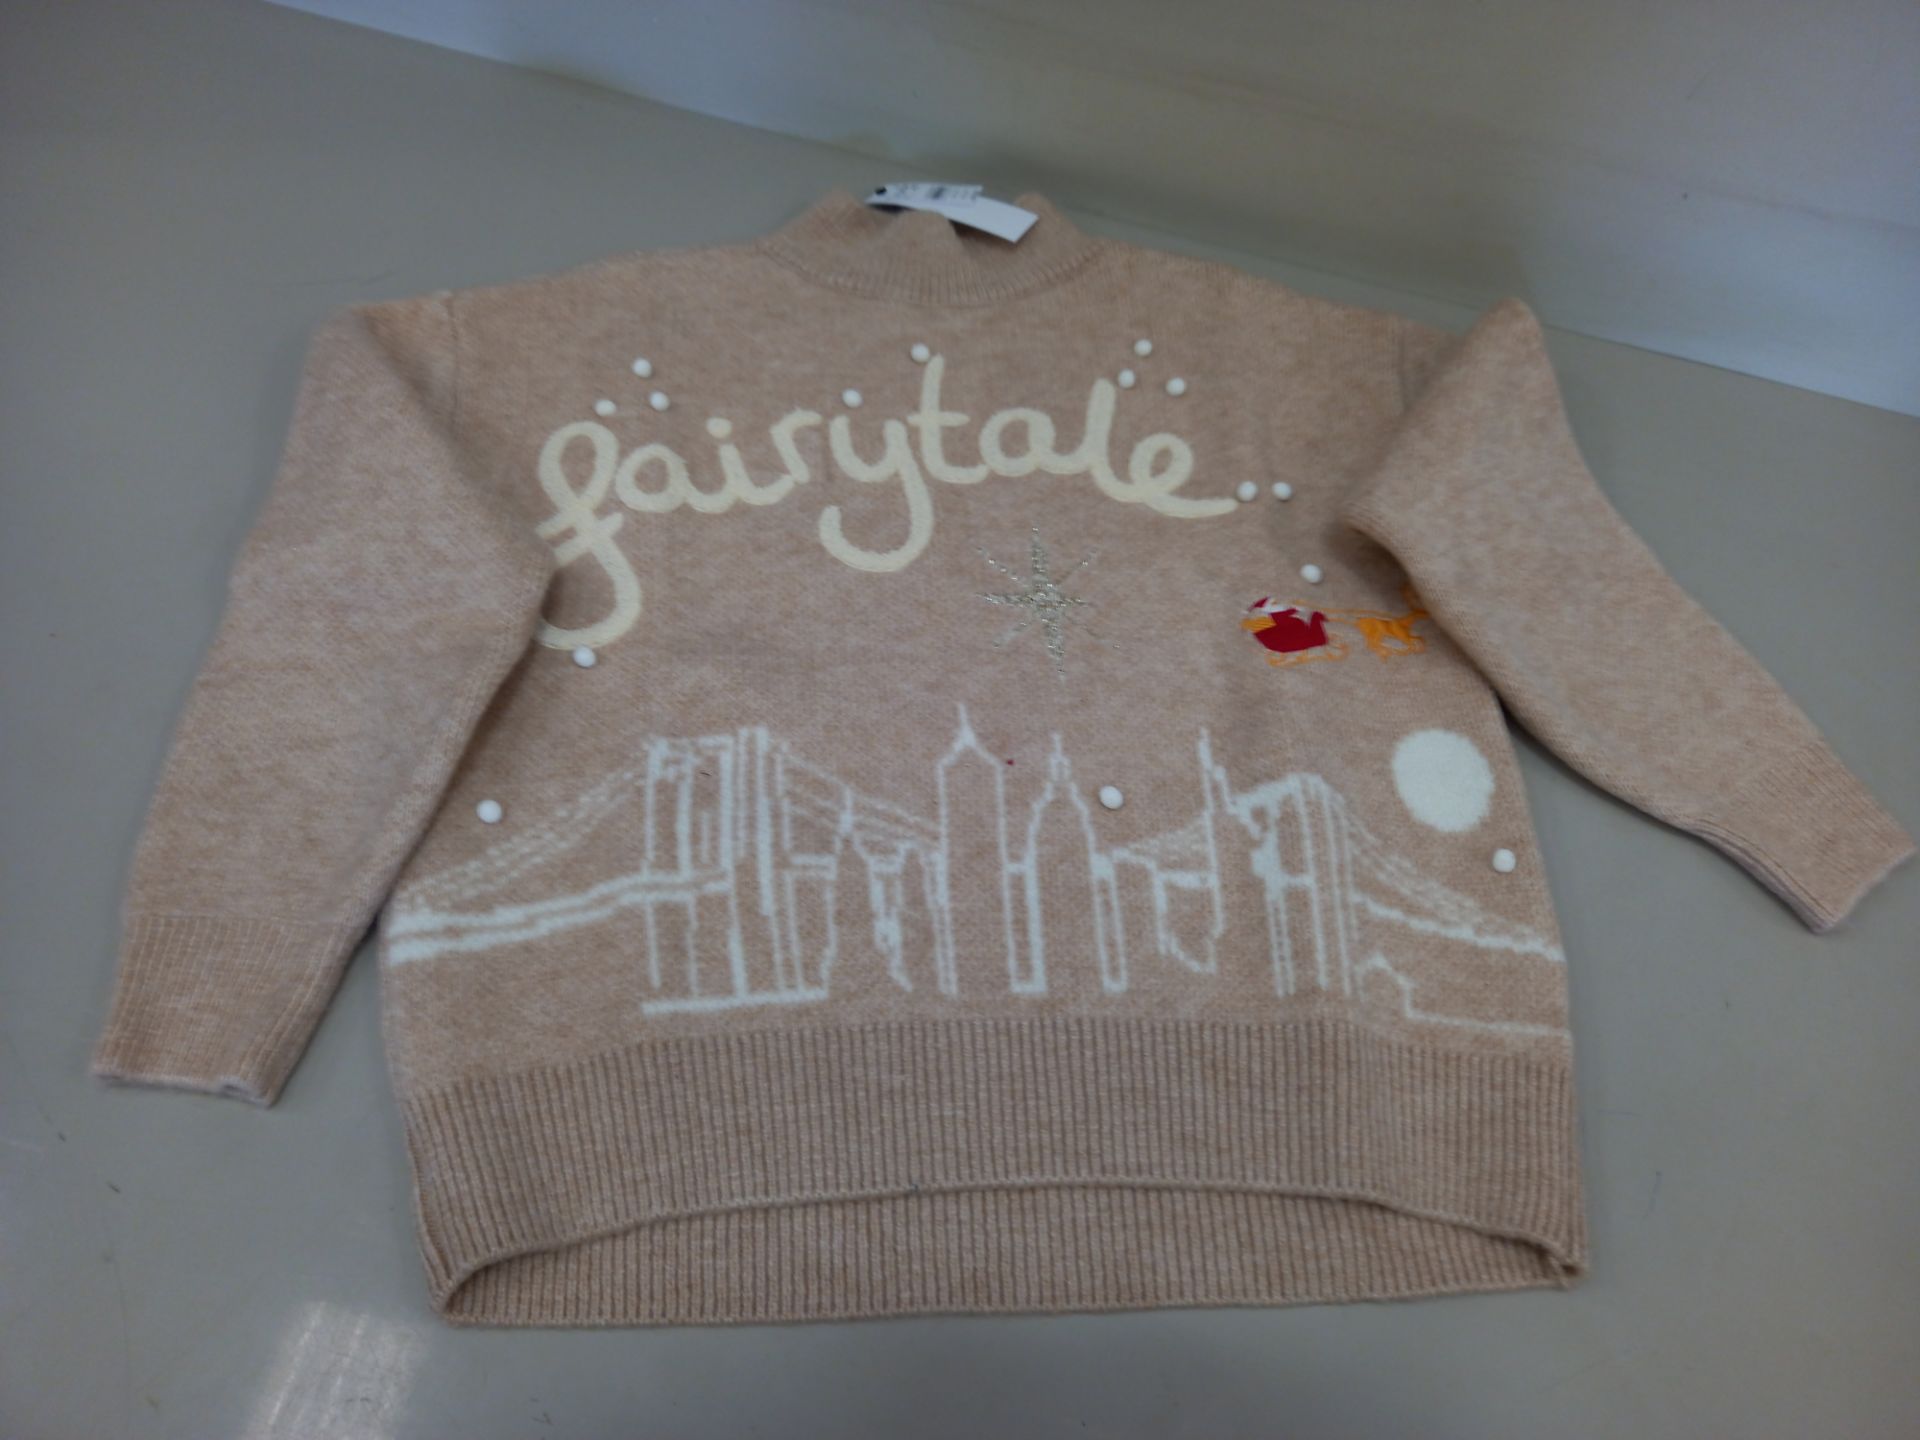 10 X BRAND NEW TOPSHOP FAIRYTALE JUMPER SIZE SMALL RRP £39.00 (TOTAL RRP £390.00)